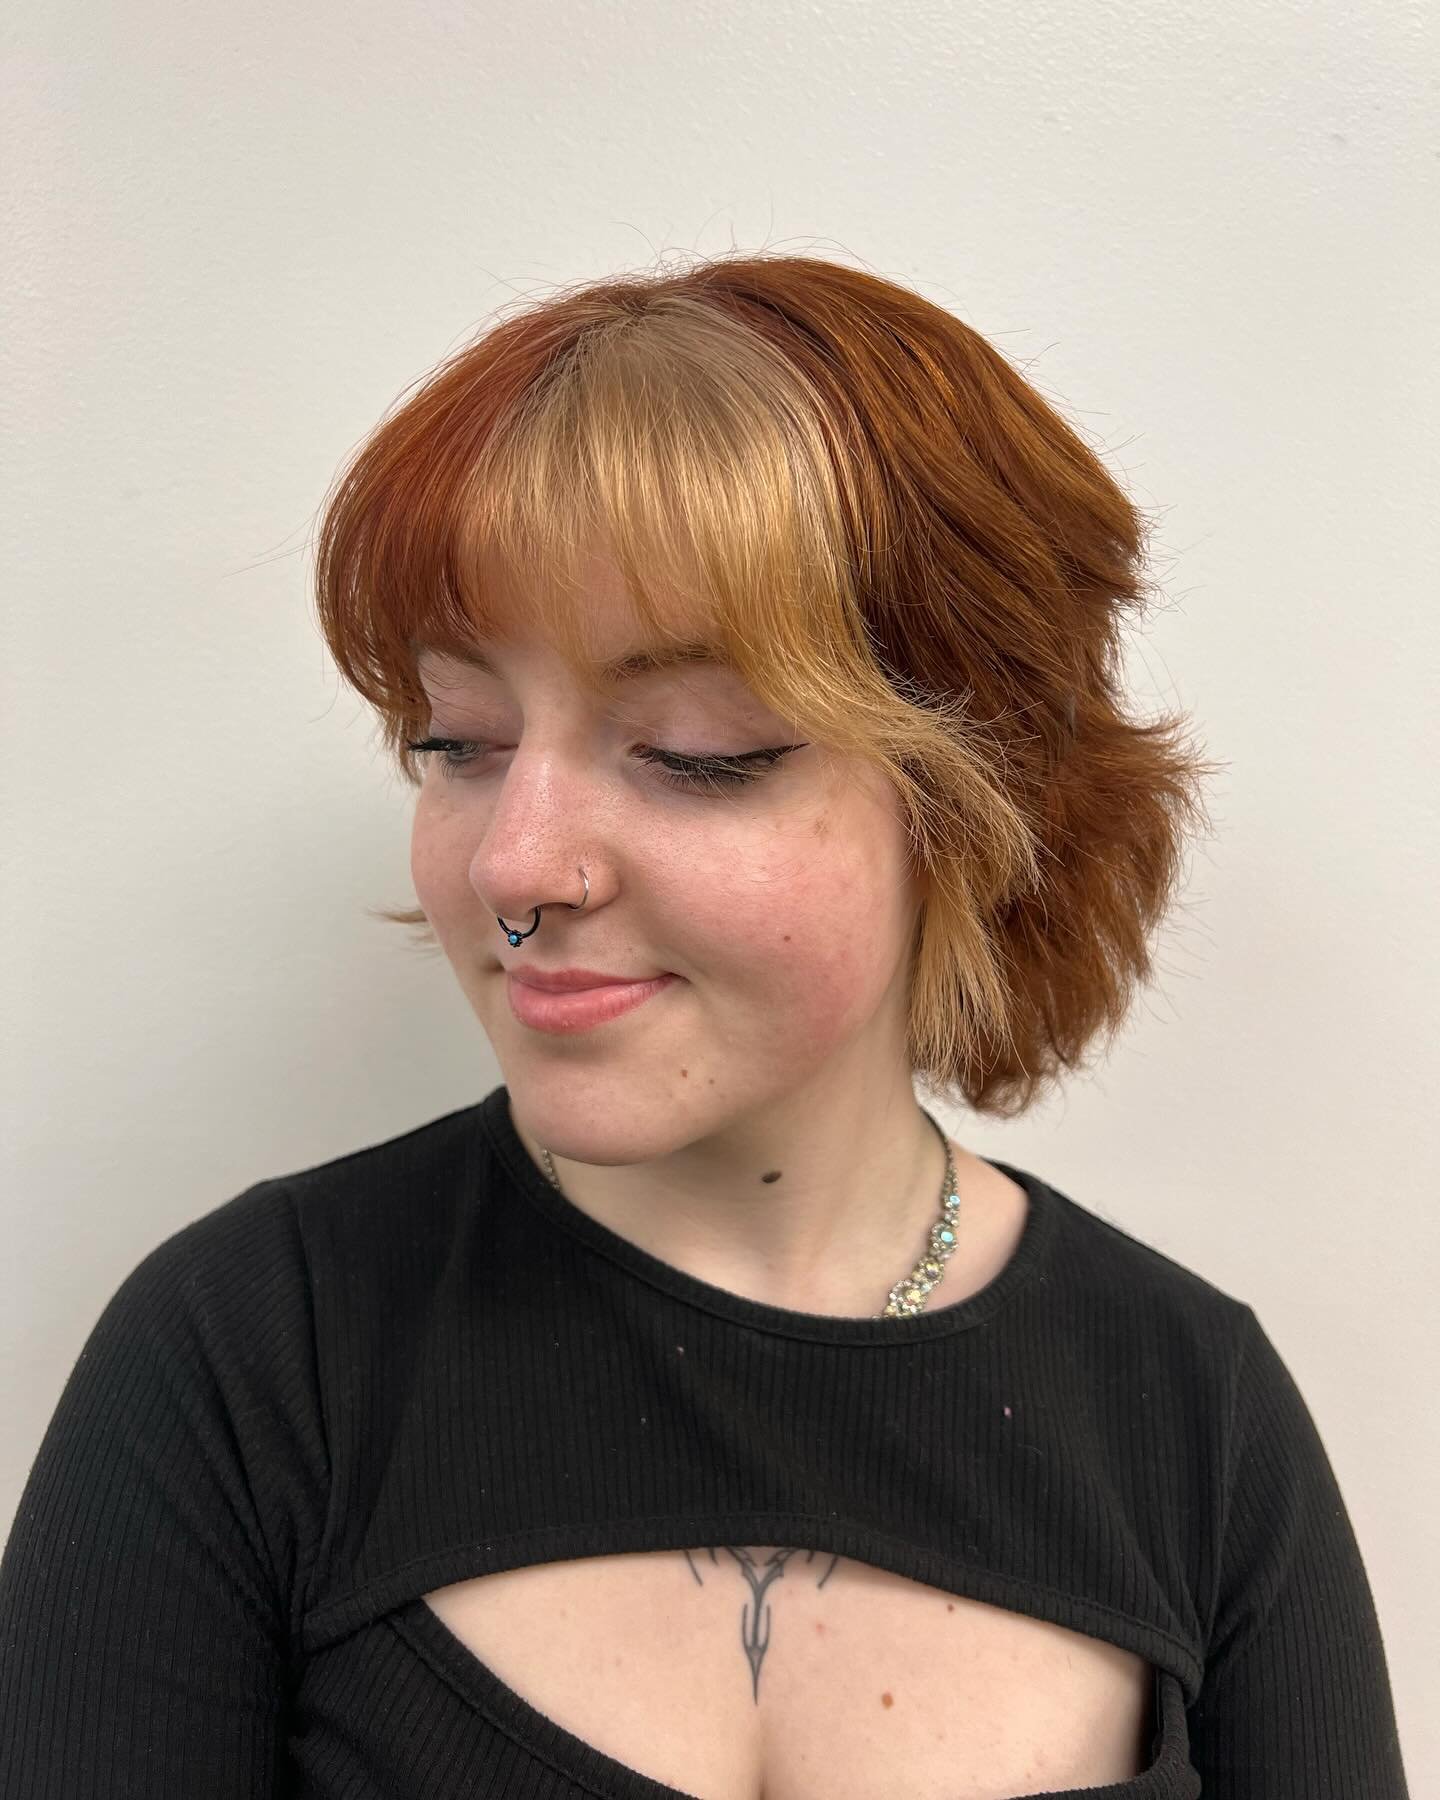 Color correction for my Hanna! @littleflowerbab ❤️ This was a fun challenge and I&rsquo;m happy with how it turned out, she is the CEO of copper!!! 
-
-
-
-
-
-
-
#cosstudent #cosmetology #redken #hairstylist #colorblocking #copper #blondeandcopper #